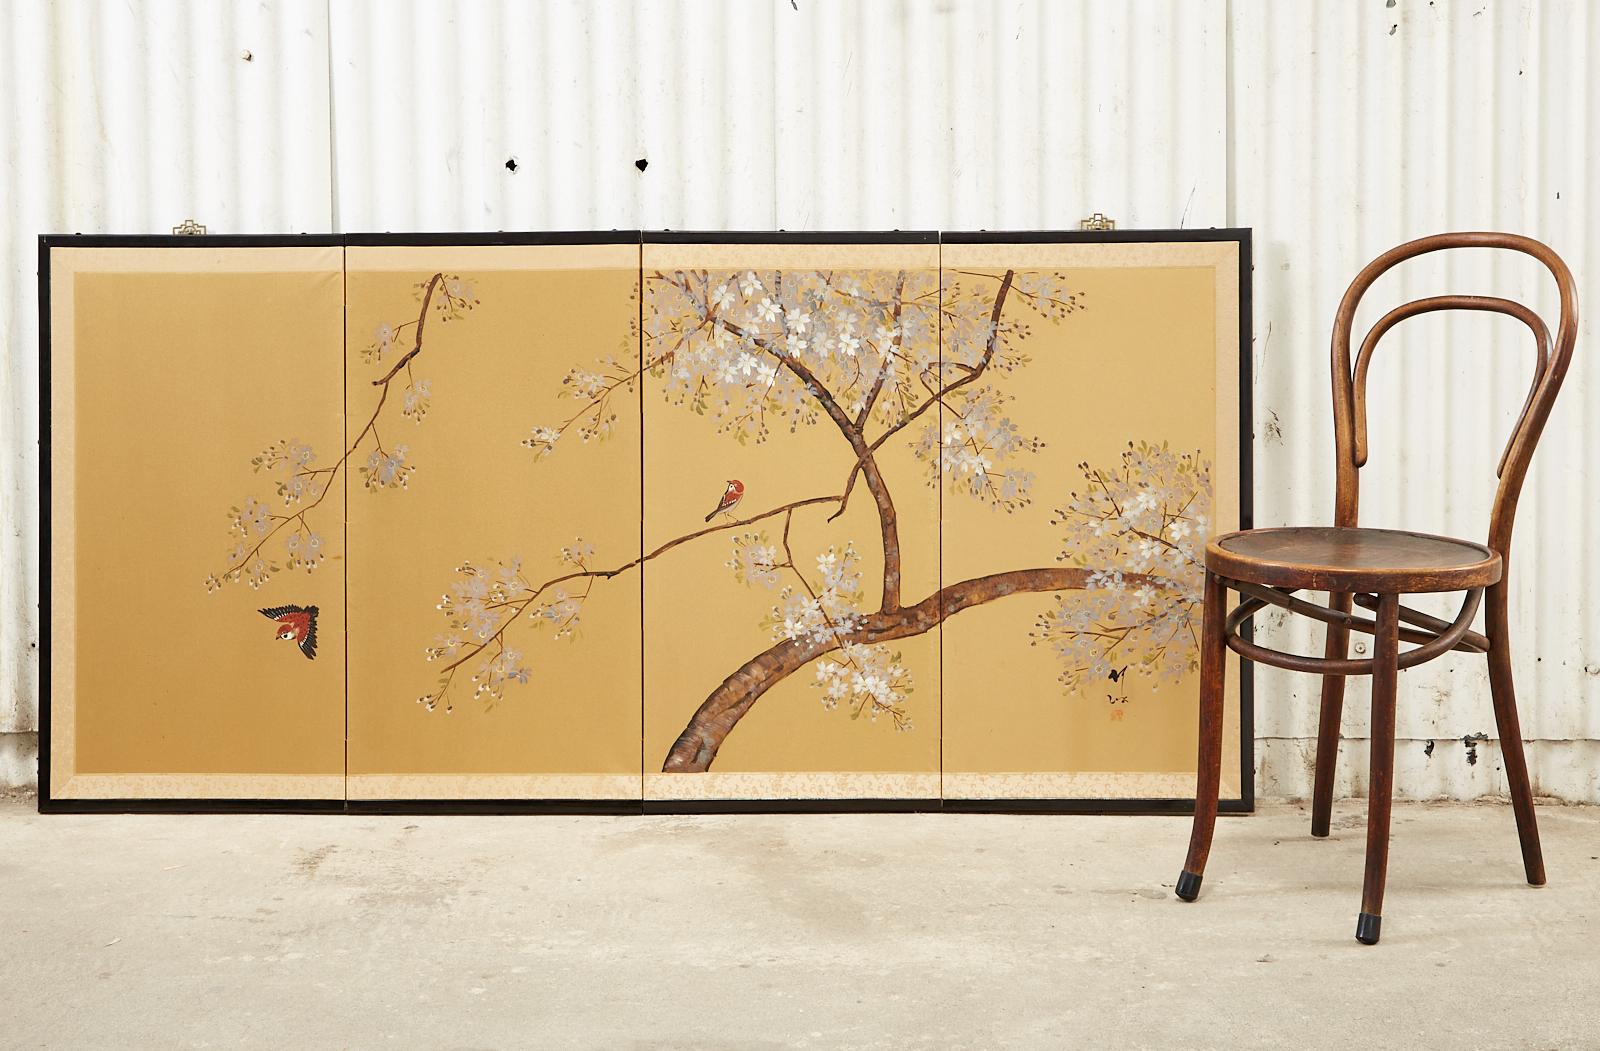 Attractive Japanese Showa period four-panel byobu screen featuring a pair of songbirds amid spring flowering cherry blossoms (Sakura). Ink and natural color pigments on a dramatic gilt ground. Signed with artist seal on the bottom right side. Set in